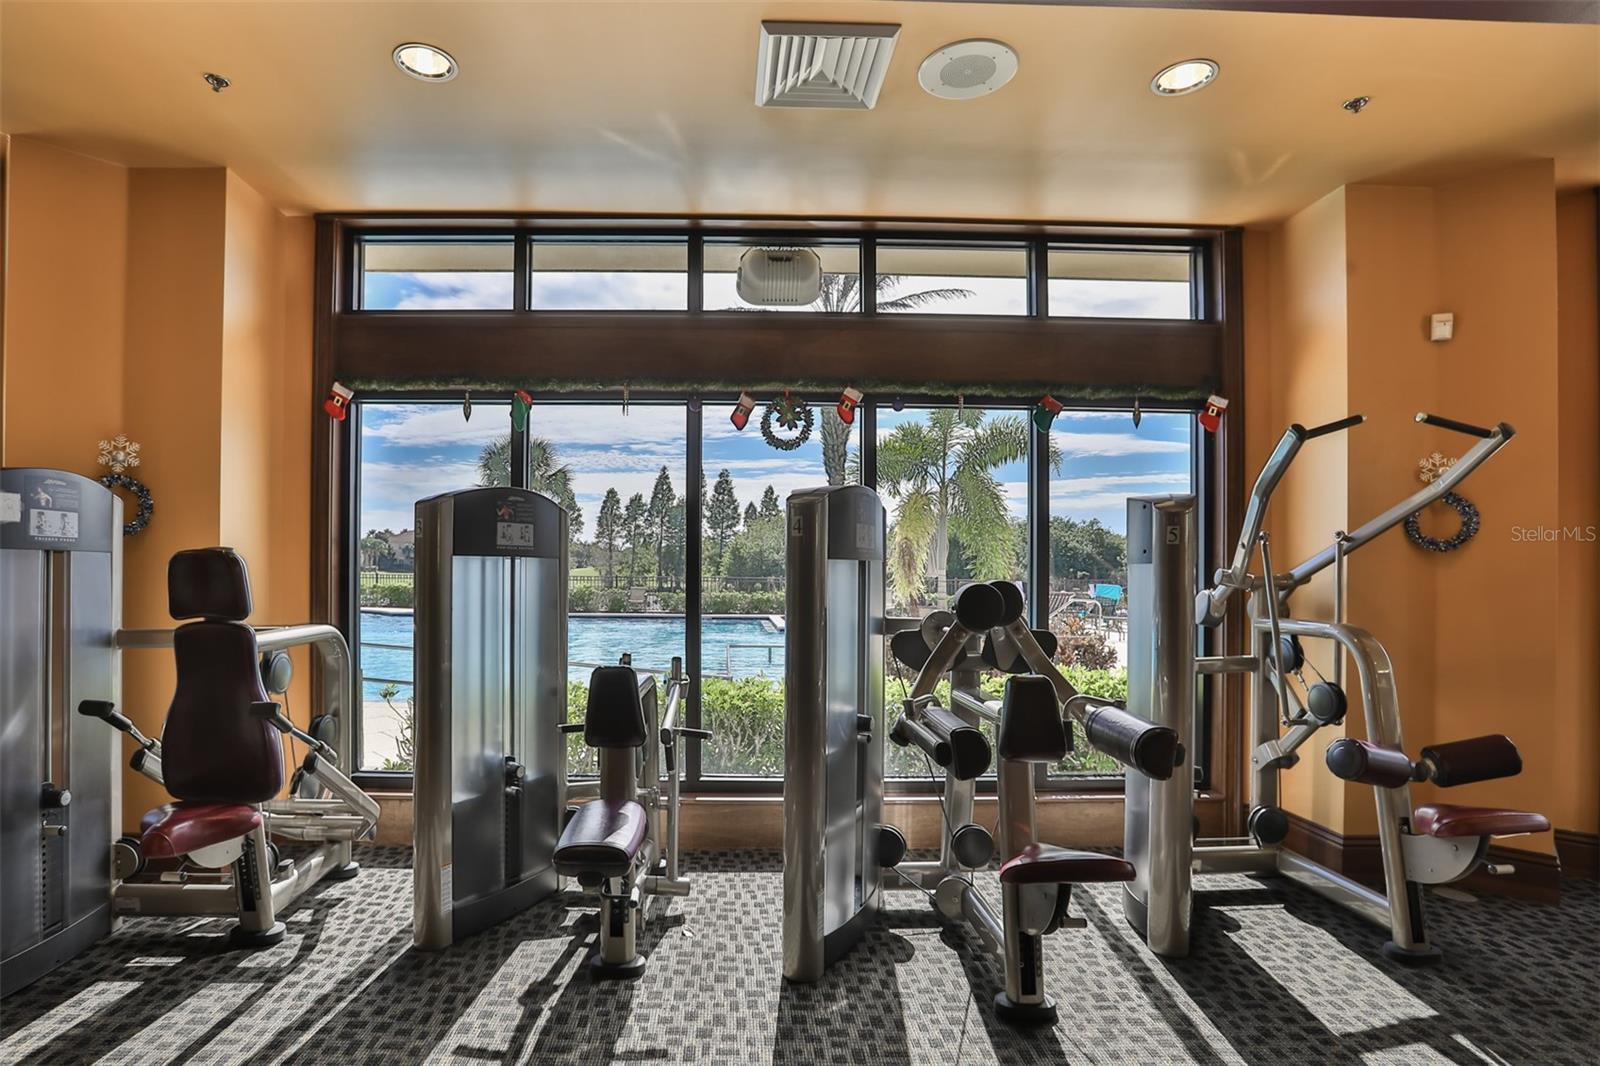 Club Renaissance fitness center is 'state of the art' and overlooks the heated pool. The indoor walking/jogging track is above on the second floor.